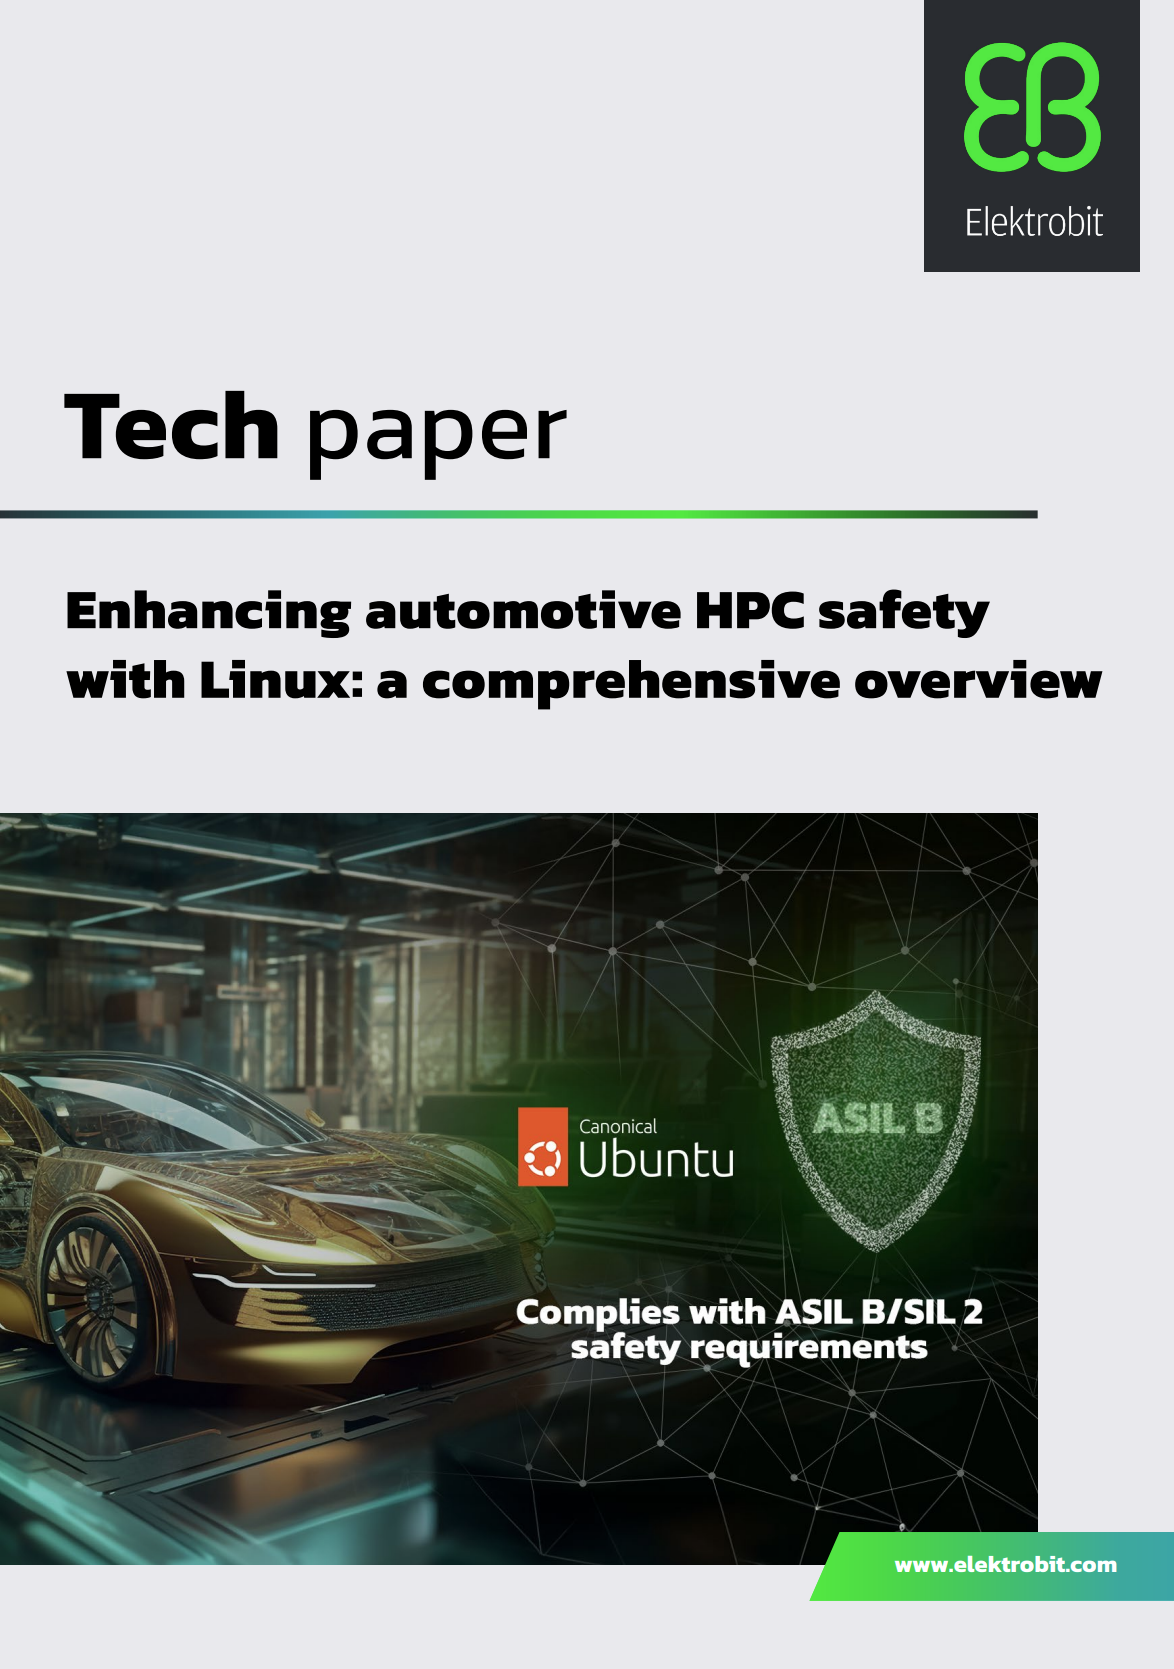 Enhancing automotive HPC safety with Linux: a comprehensive overview